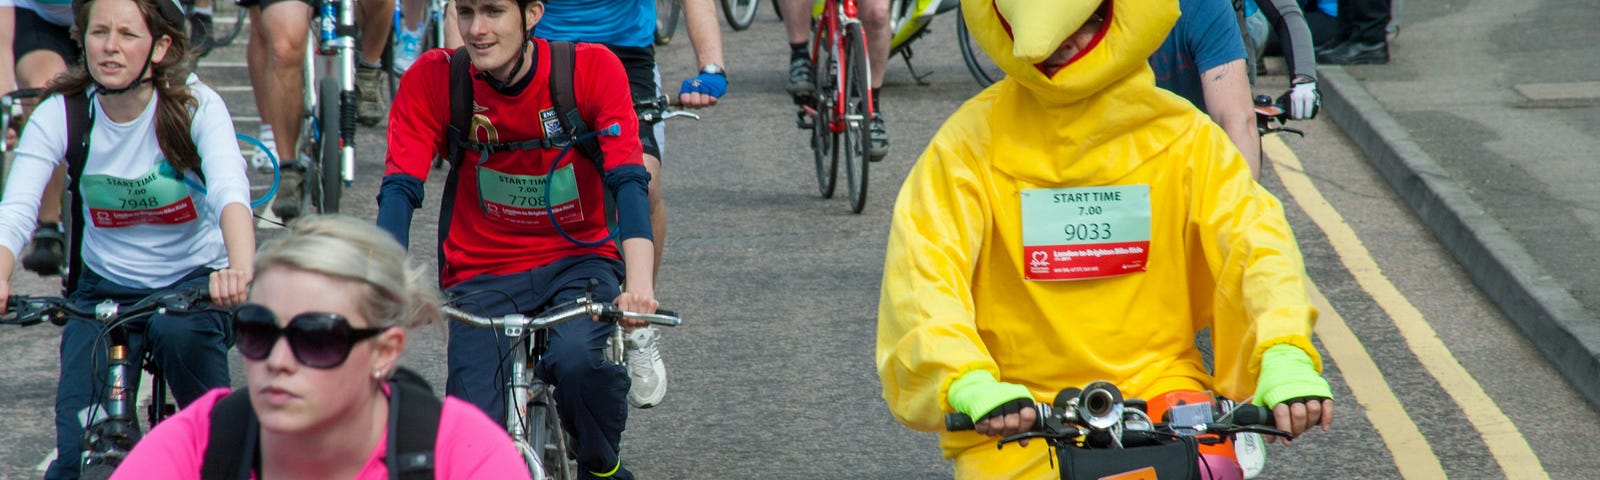 The Lunatic Poet dressed as Big Bird during a Cycling race.